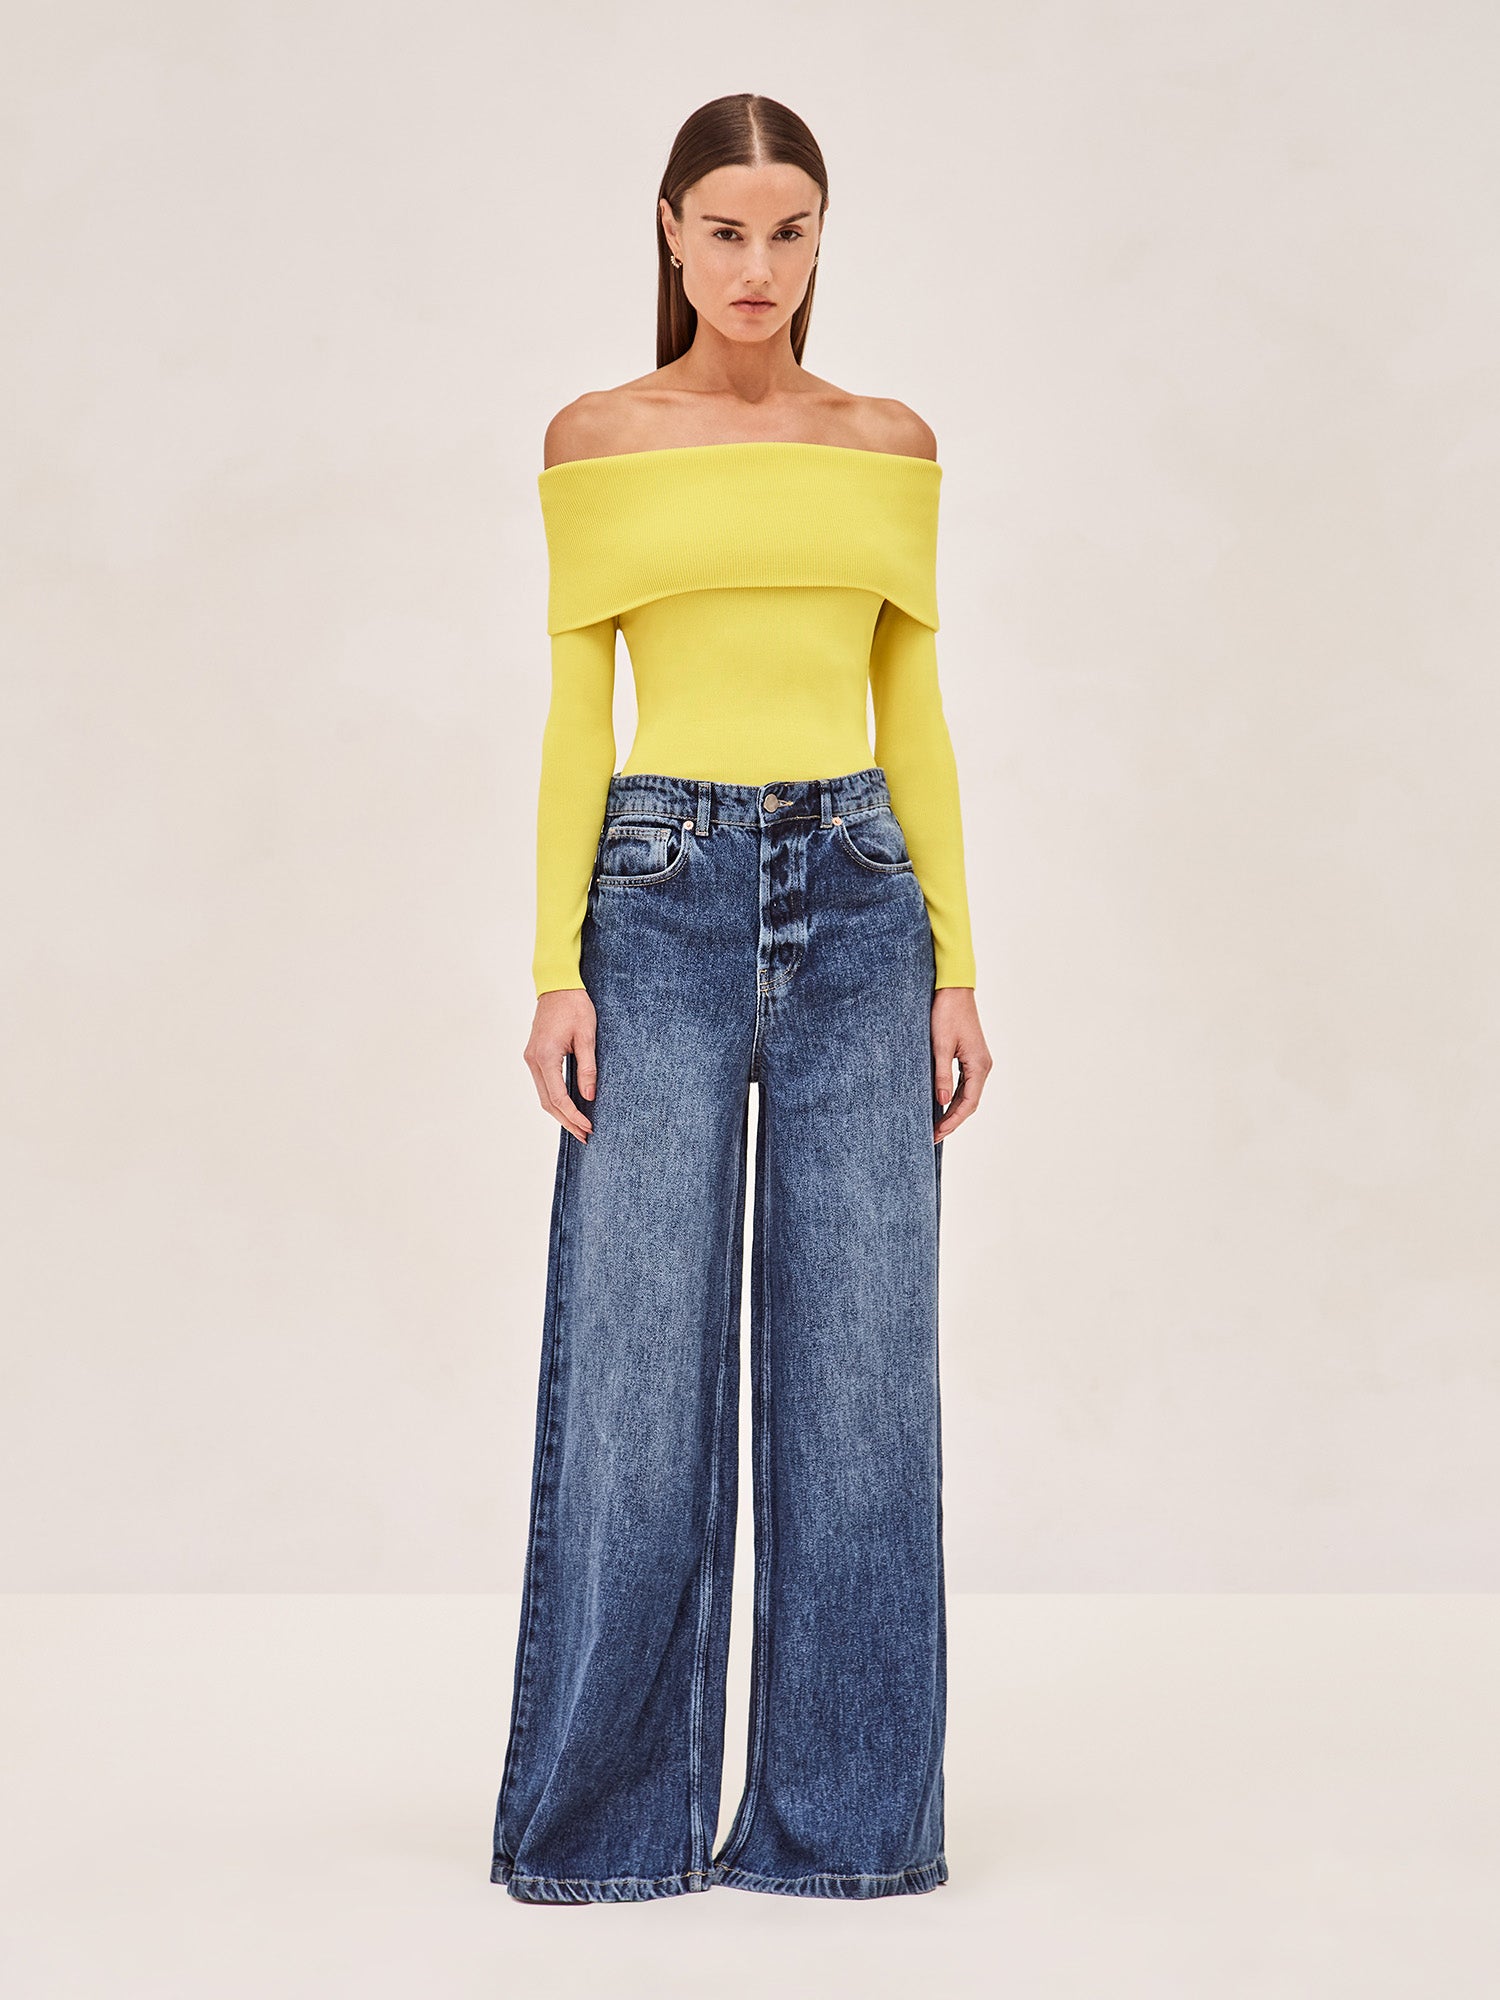 ALEXIS Amie off the shoulder long sleeve top in yellow 